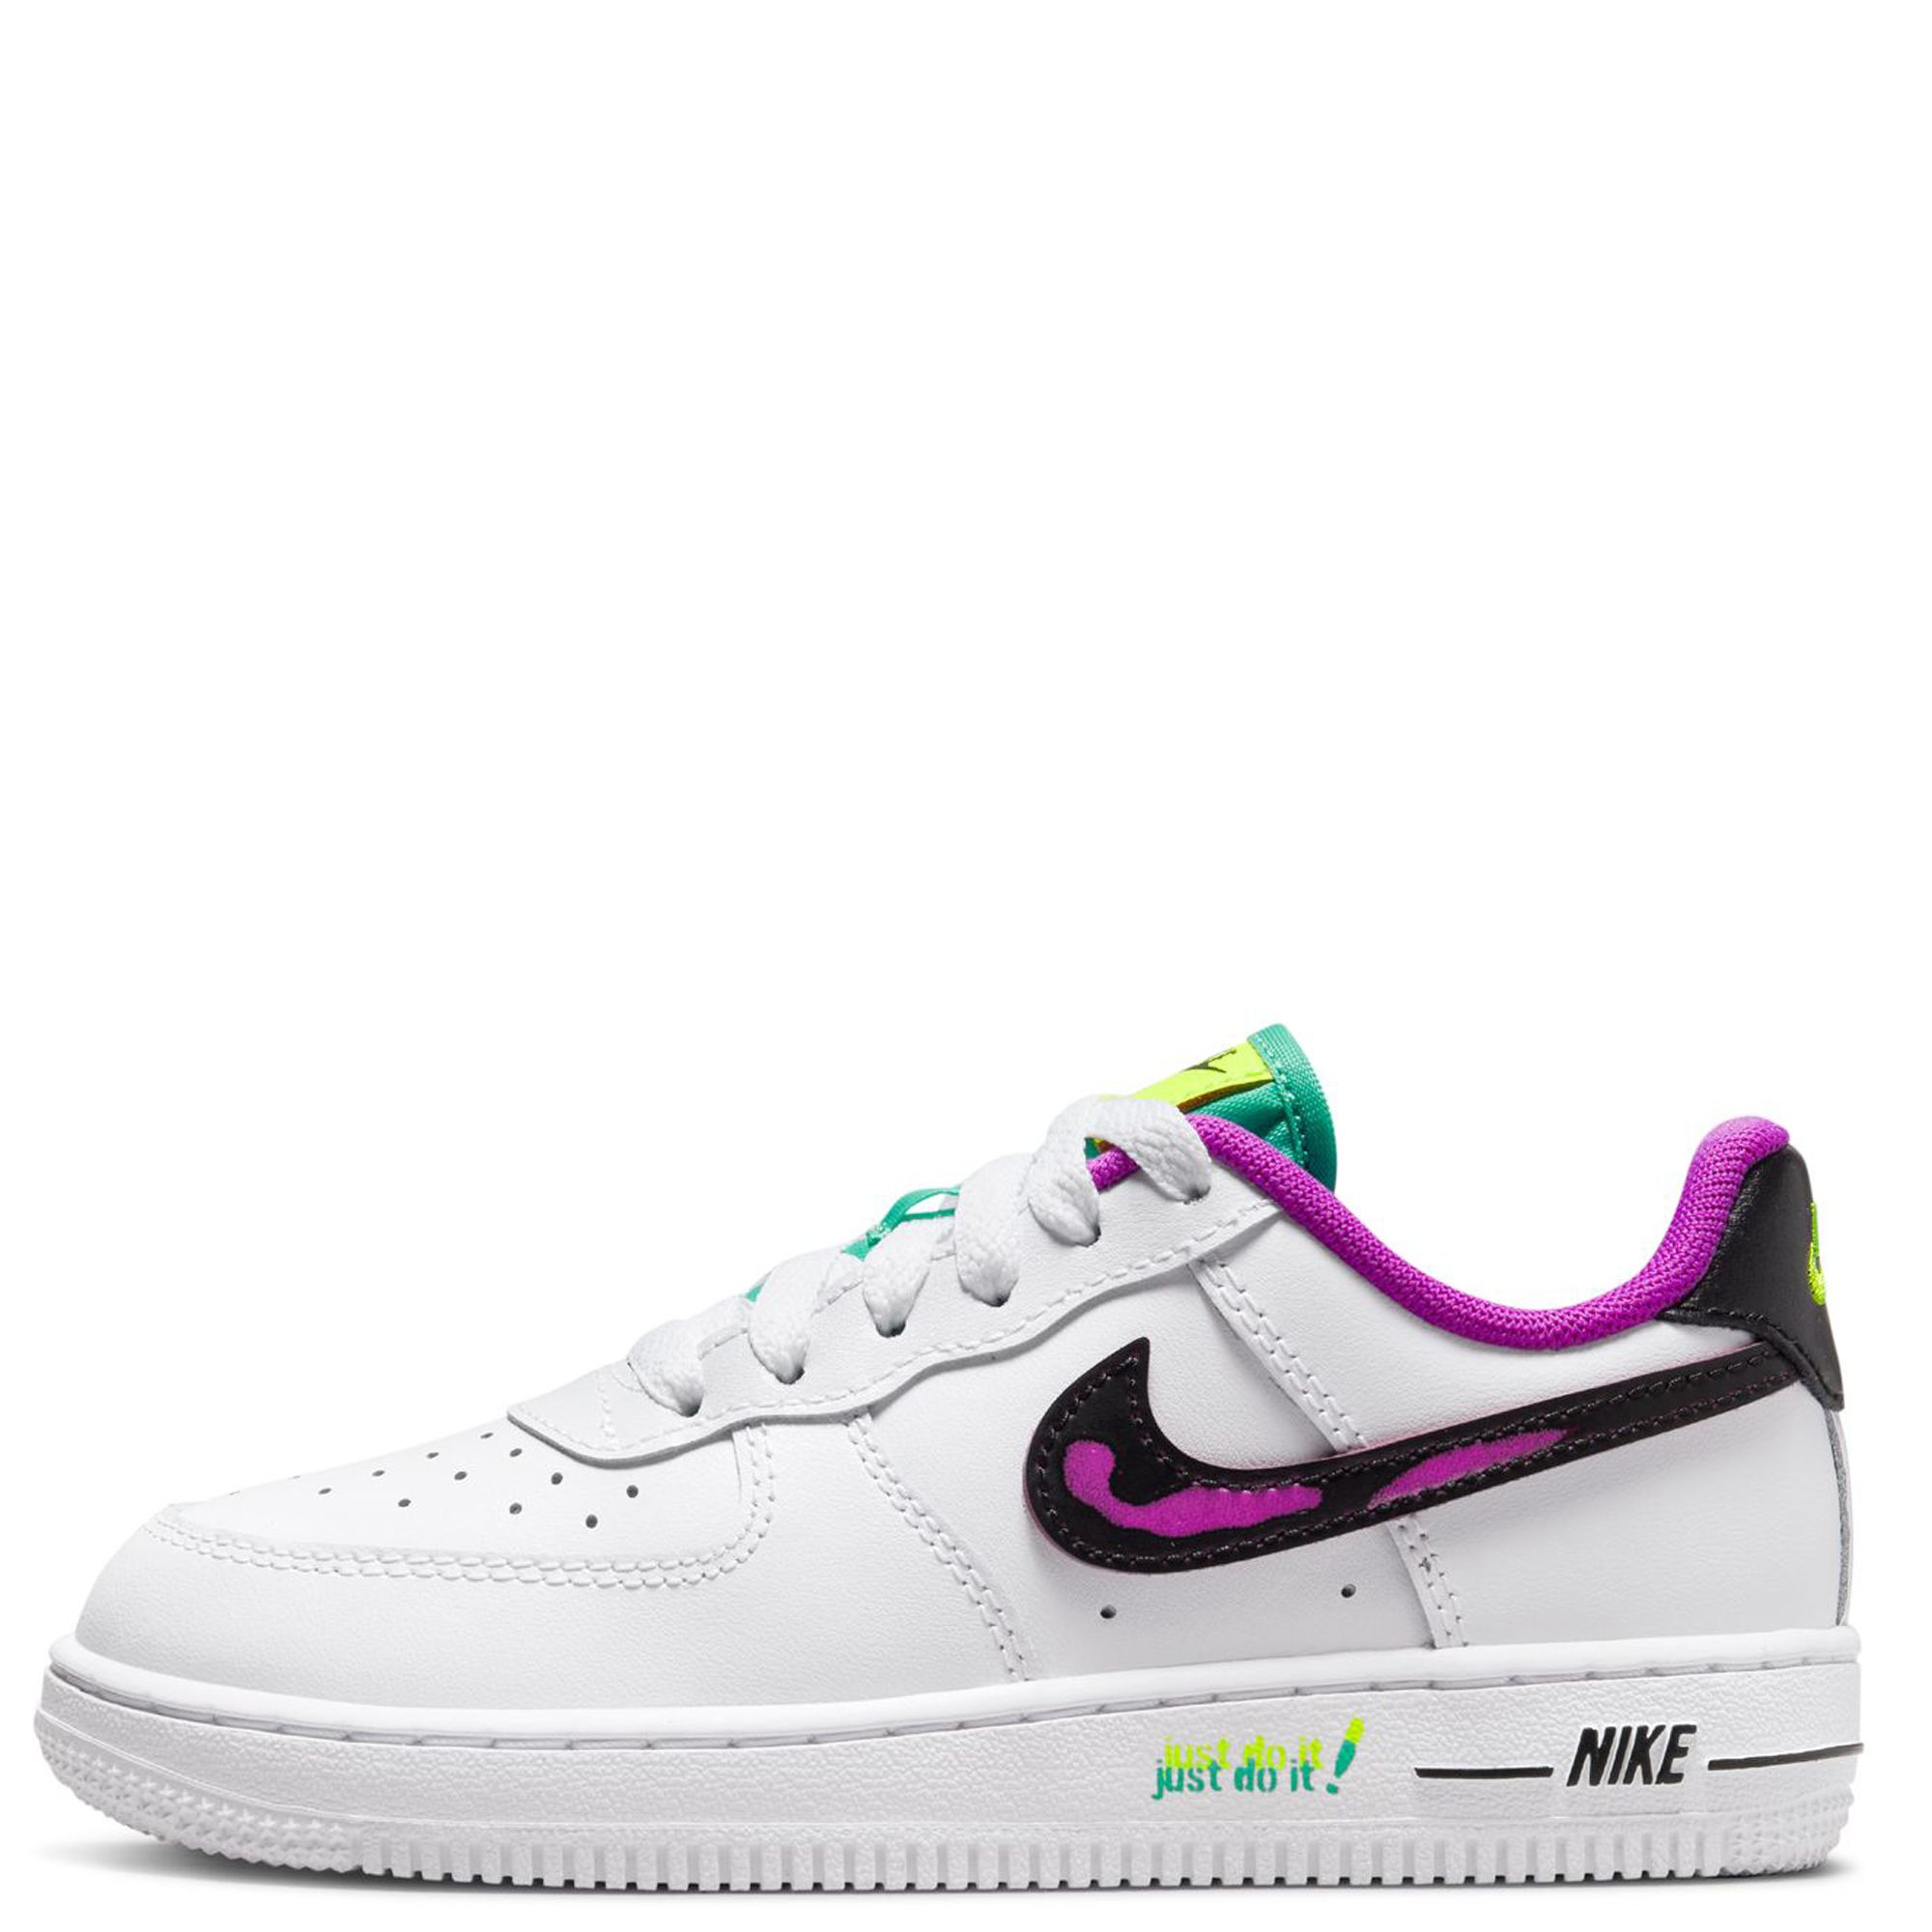 Nike Air Force 1 LV8 Little Kid's Shoes